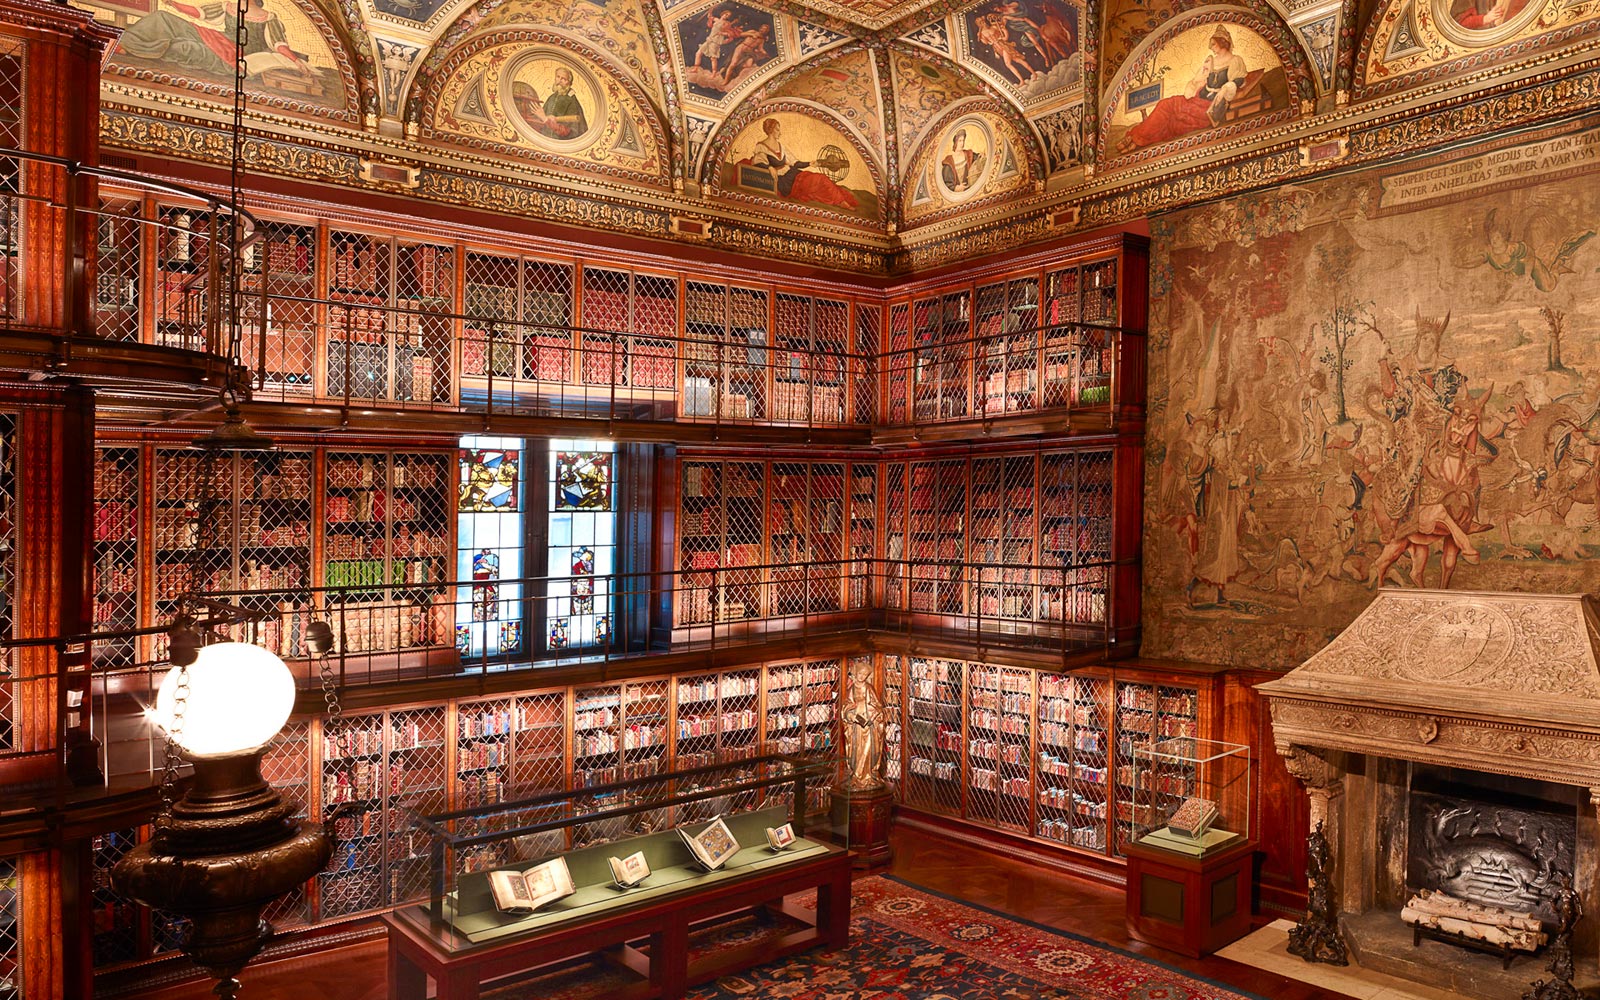 Photograph of J. Pierpont Morgan's Library interior showing bookshelves and tapestry.